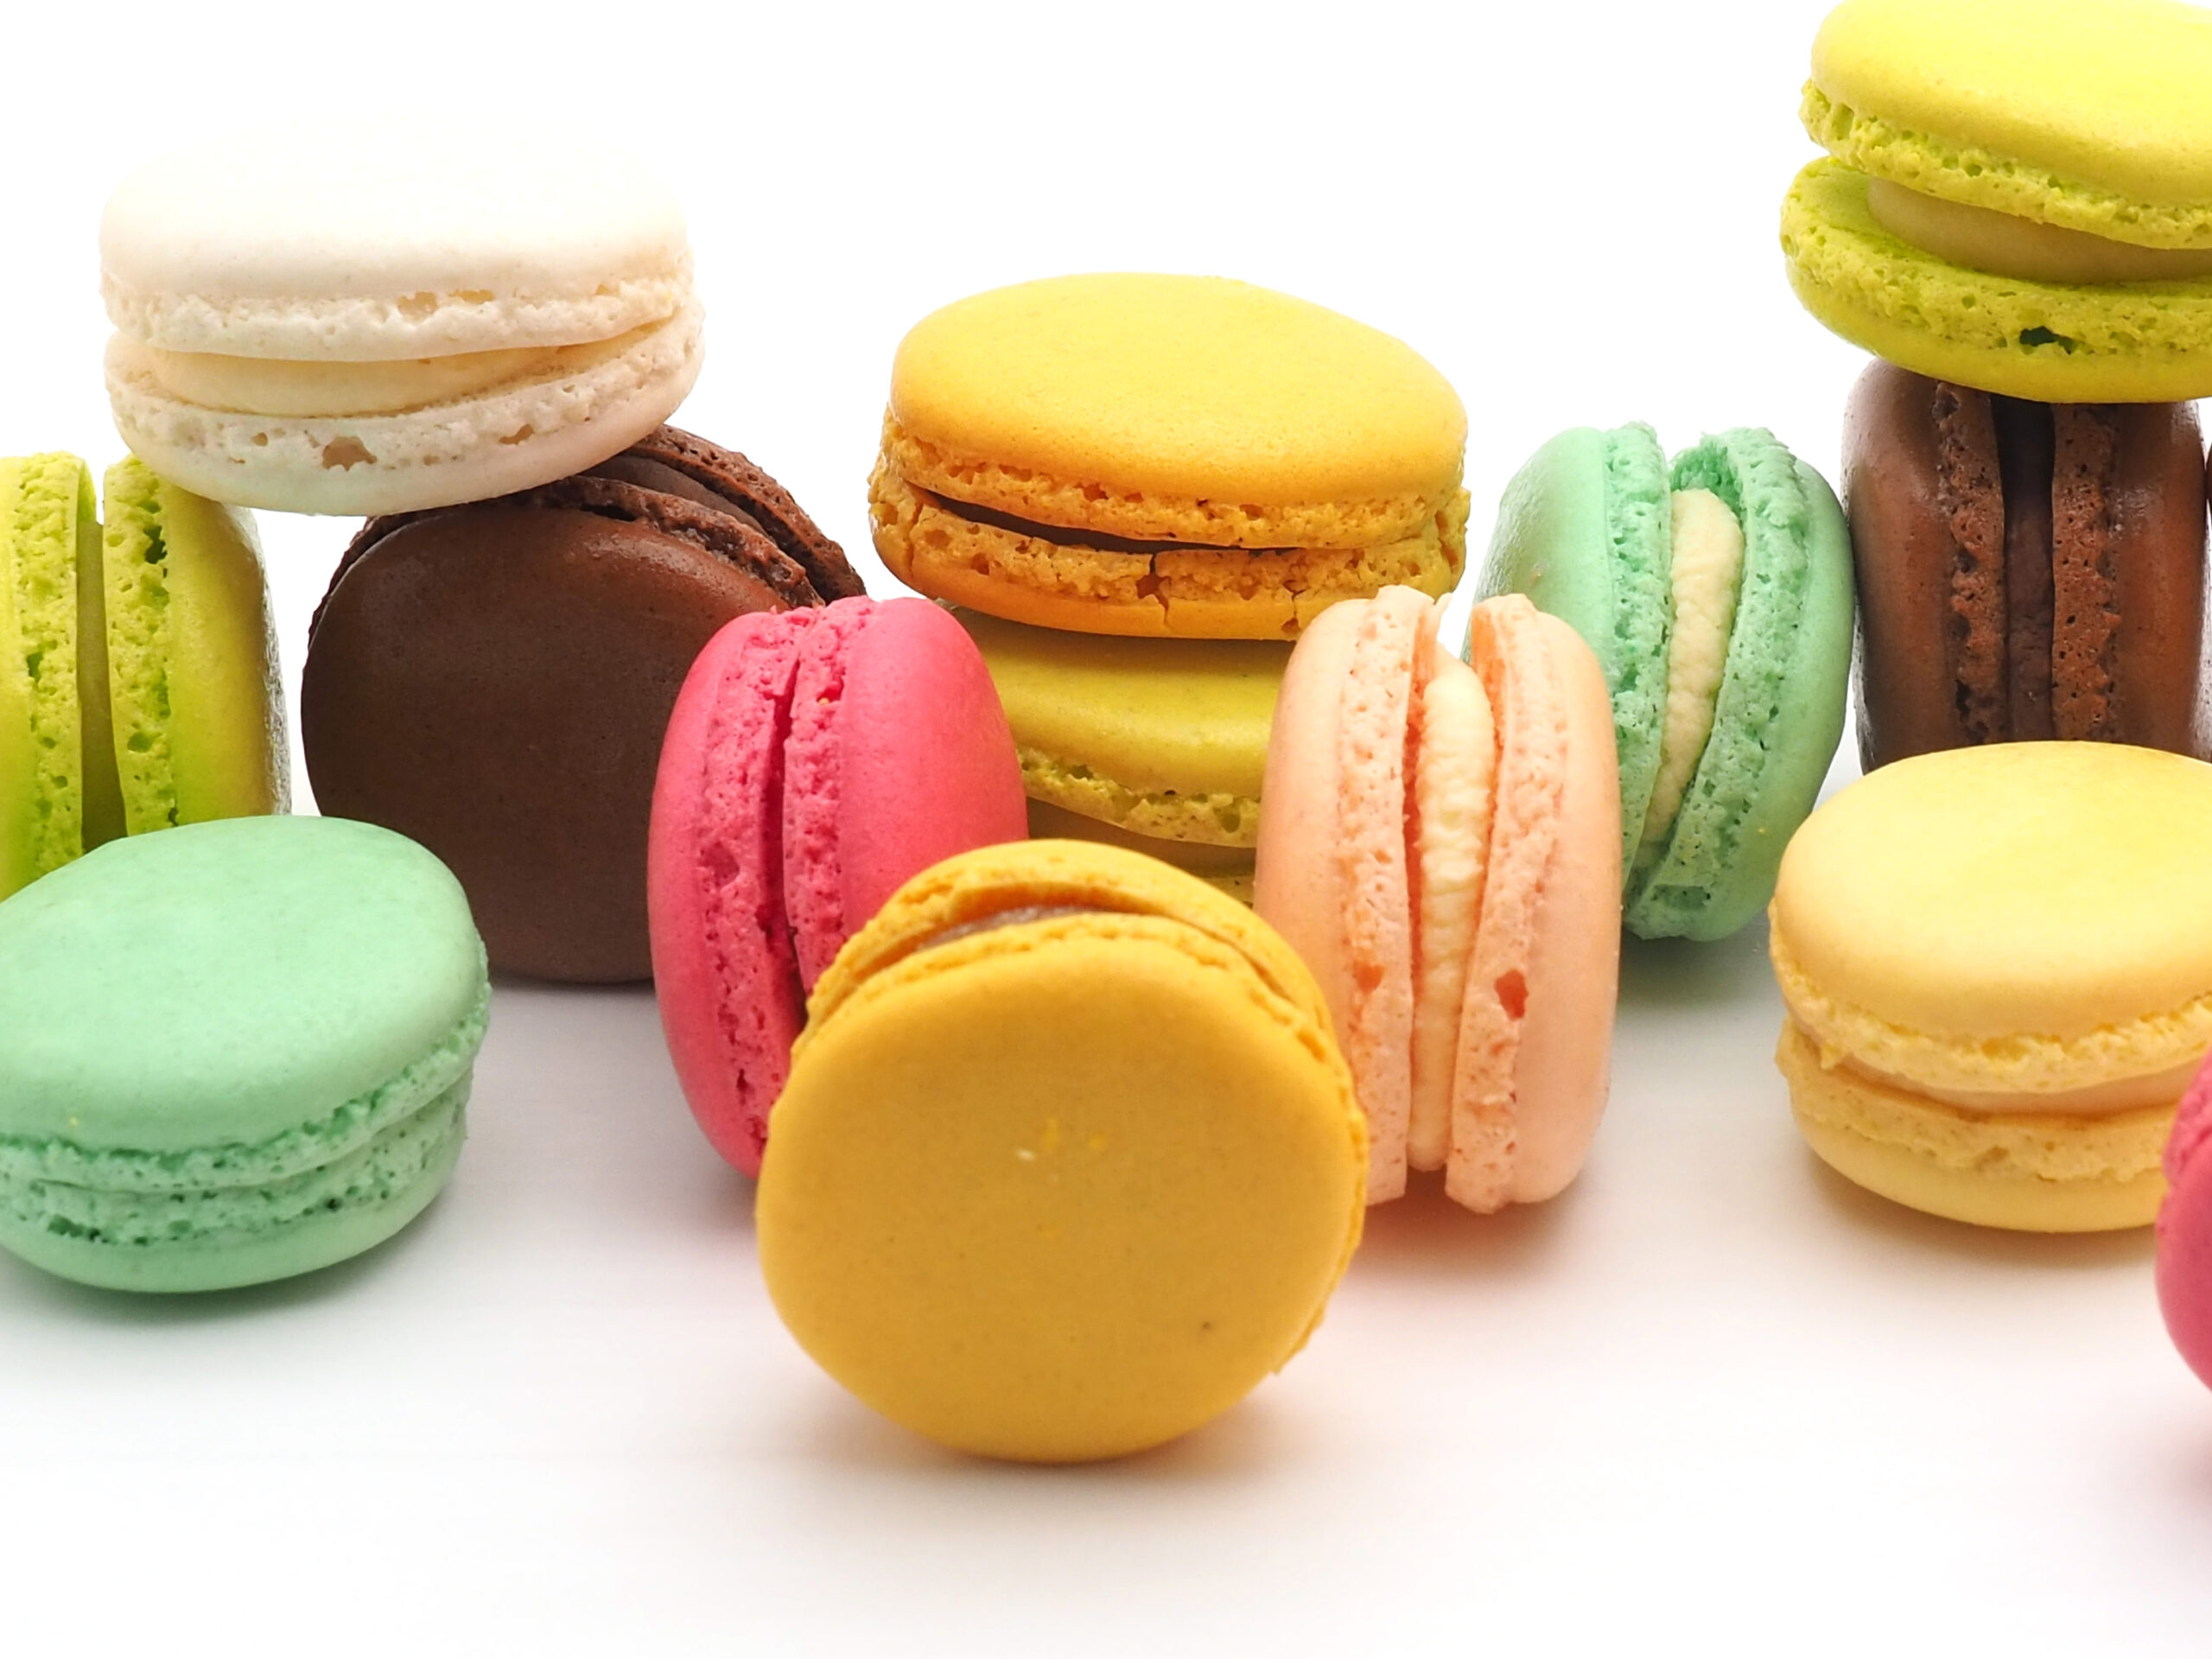 https://cabiron.com/wp-content/uploads/2022/11/Macarons-3-scaled.jpg